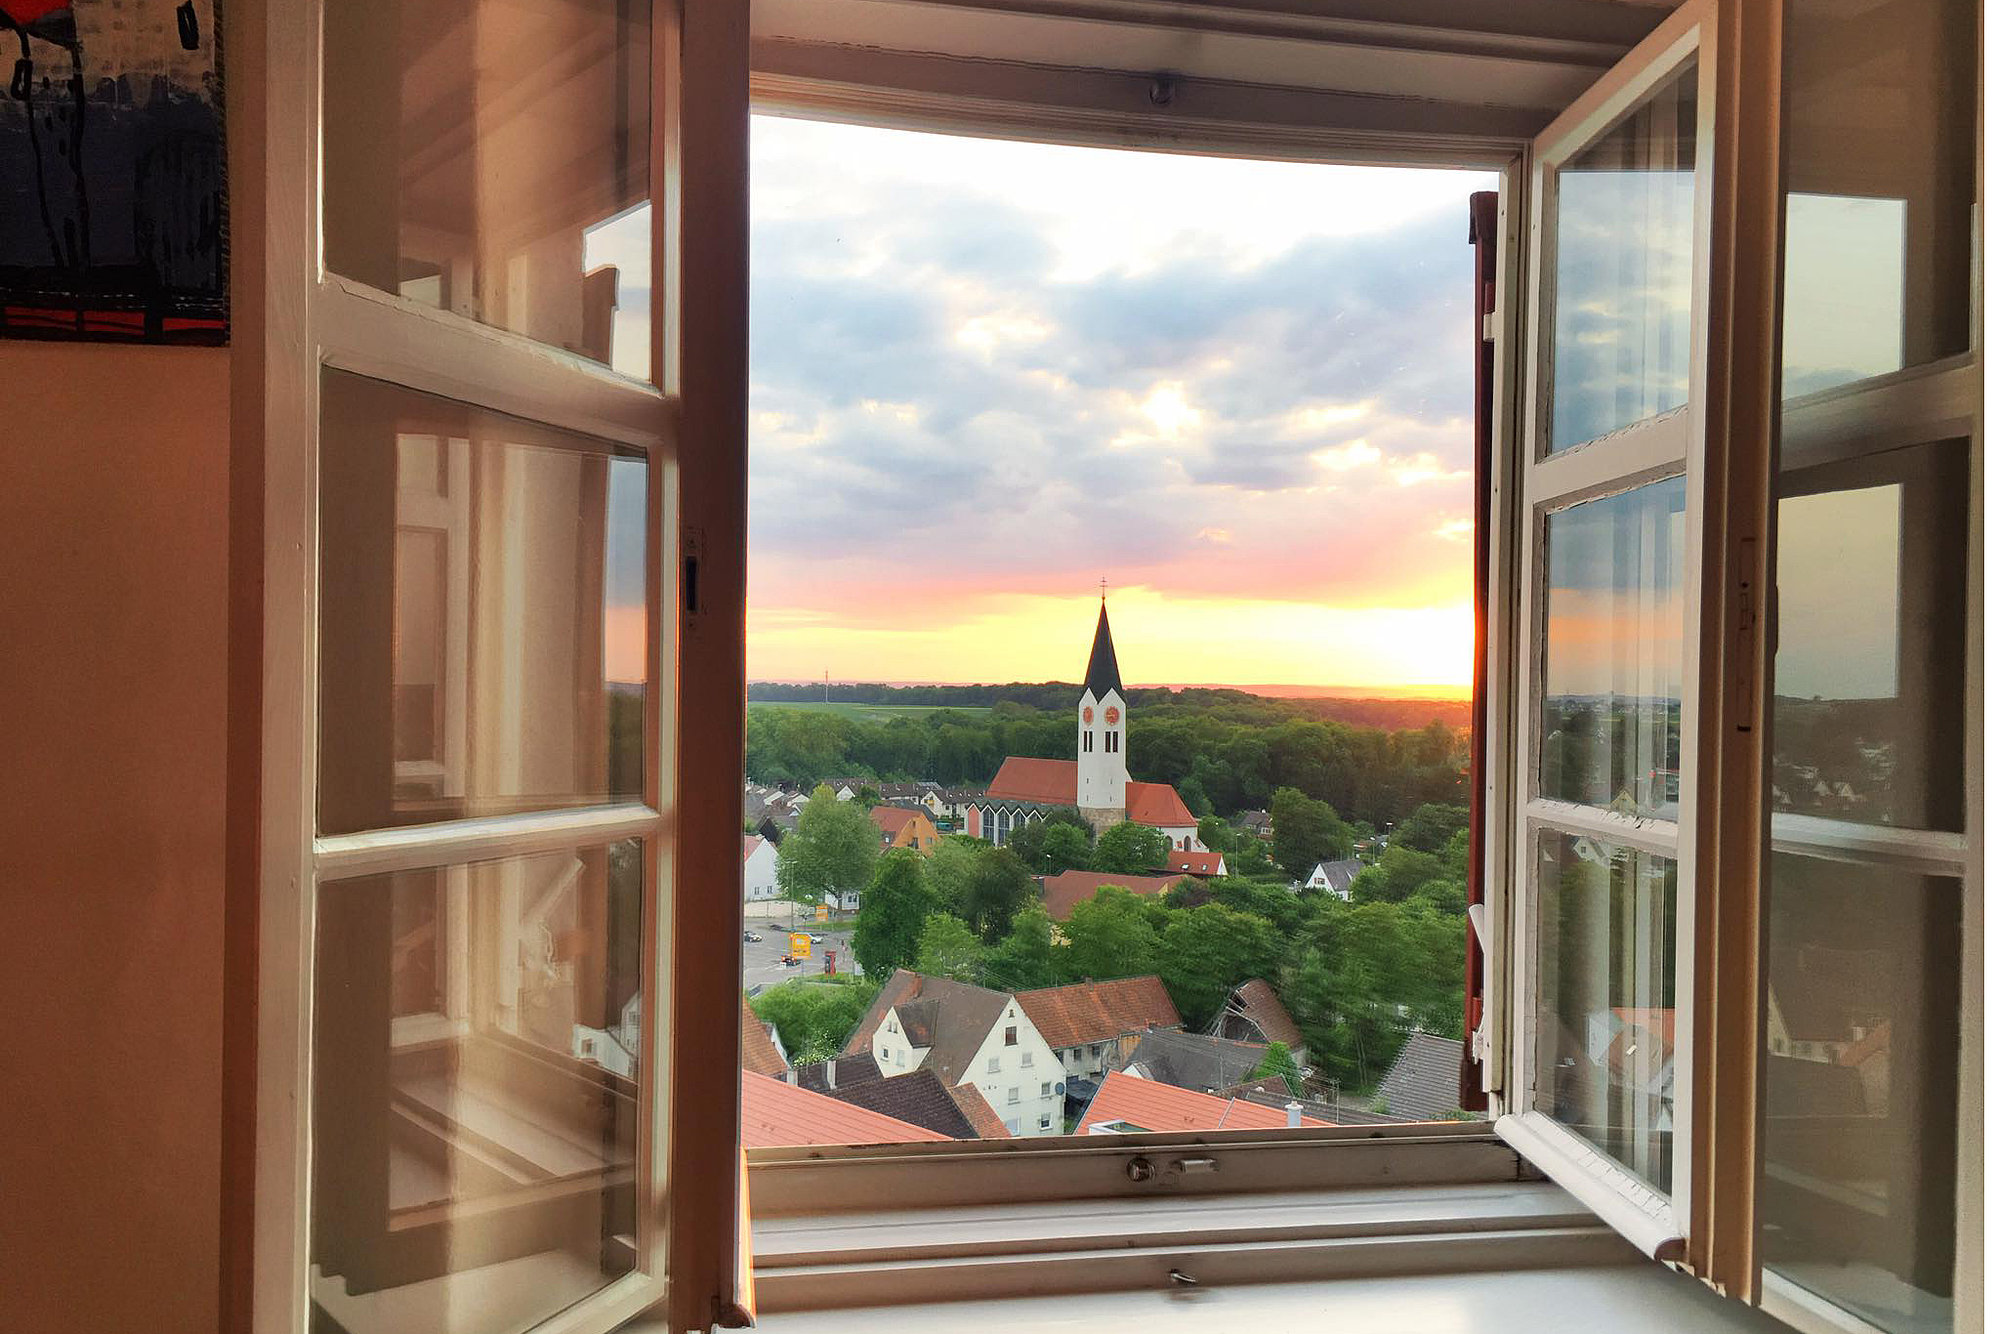 Favorite place with a view. Photo: Sabrina Schmidt